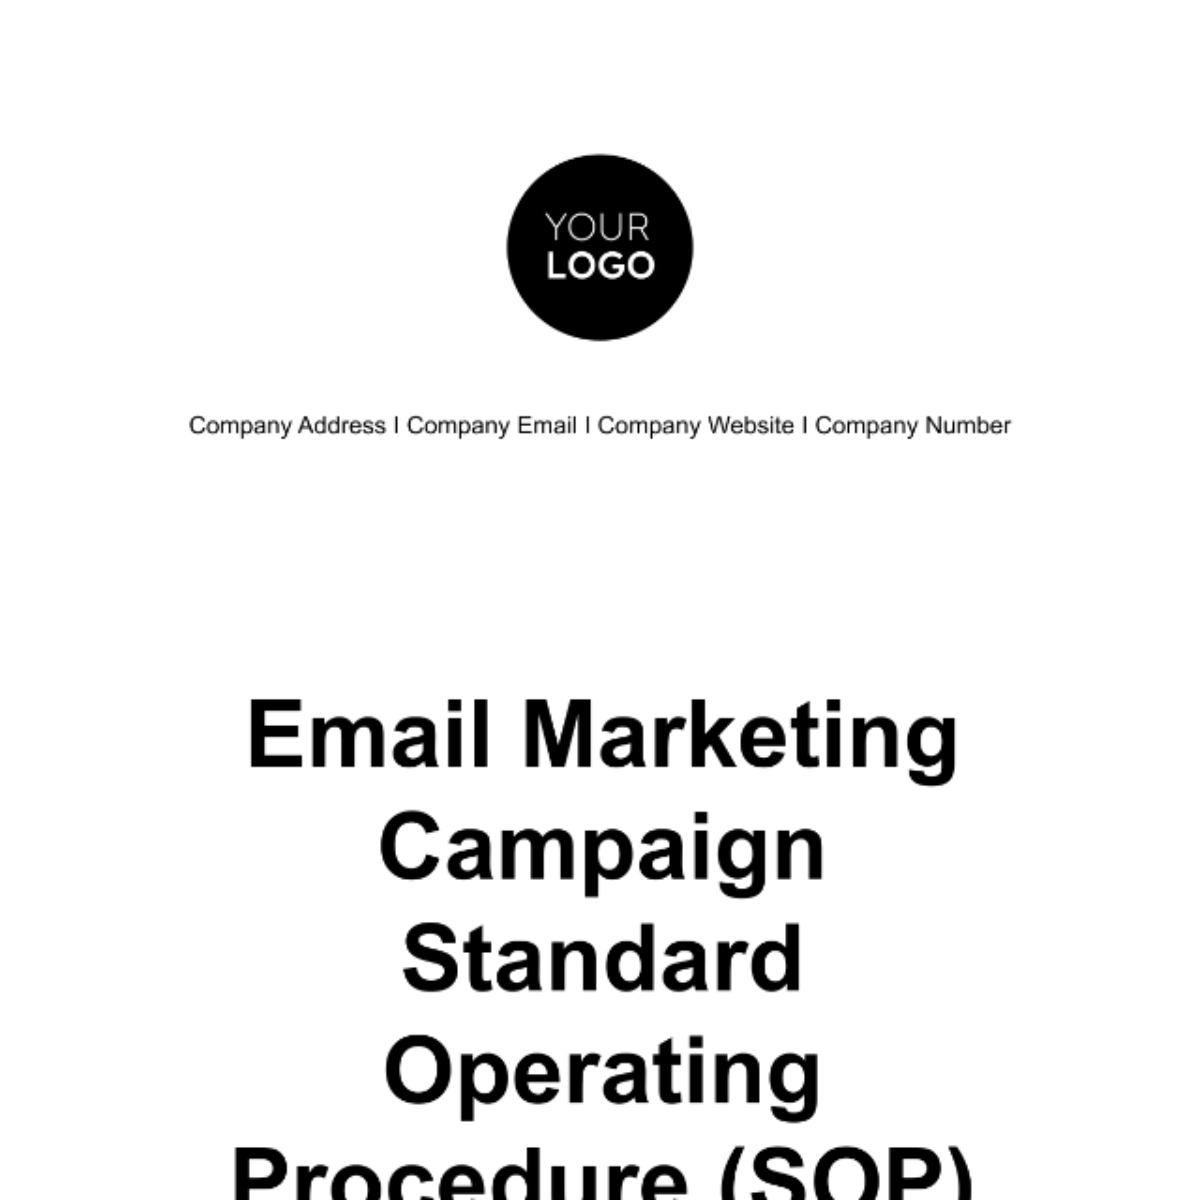 Email Marketing Campaign Standard Operating Procedure (SOP) Template